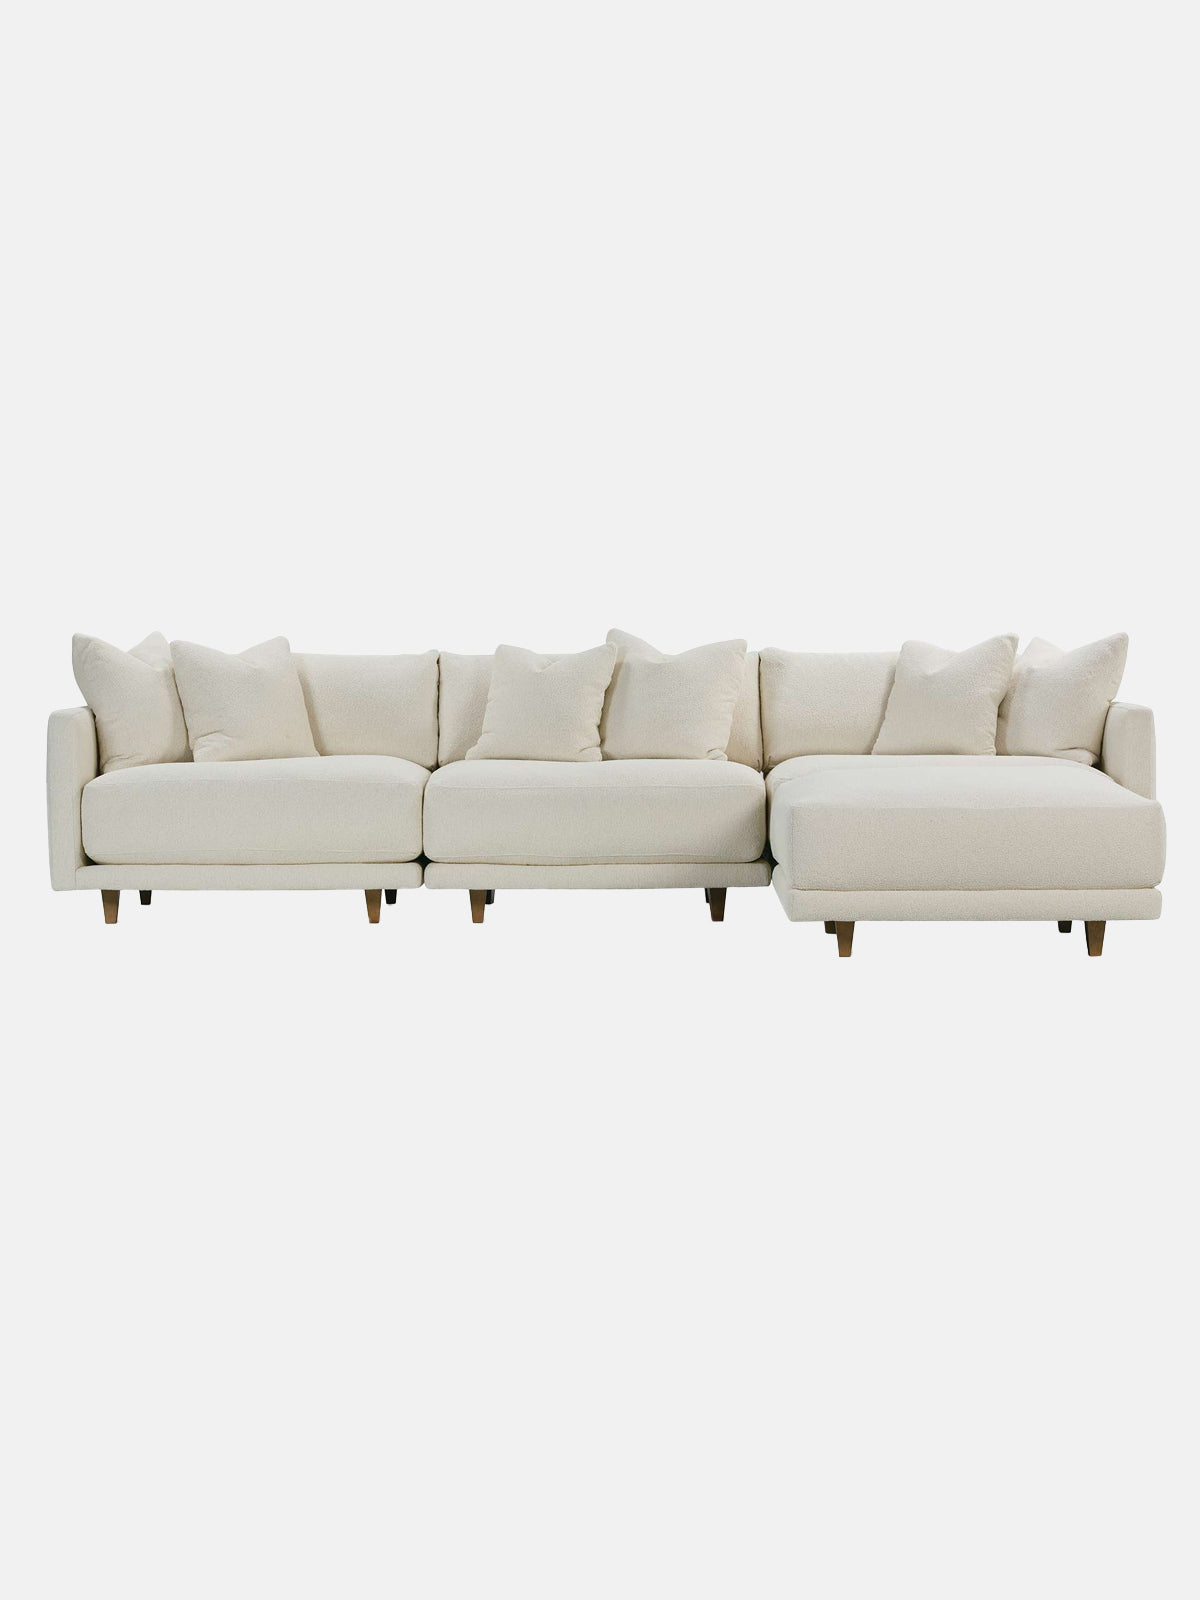 The Neval Sectional